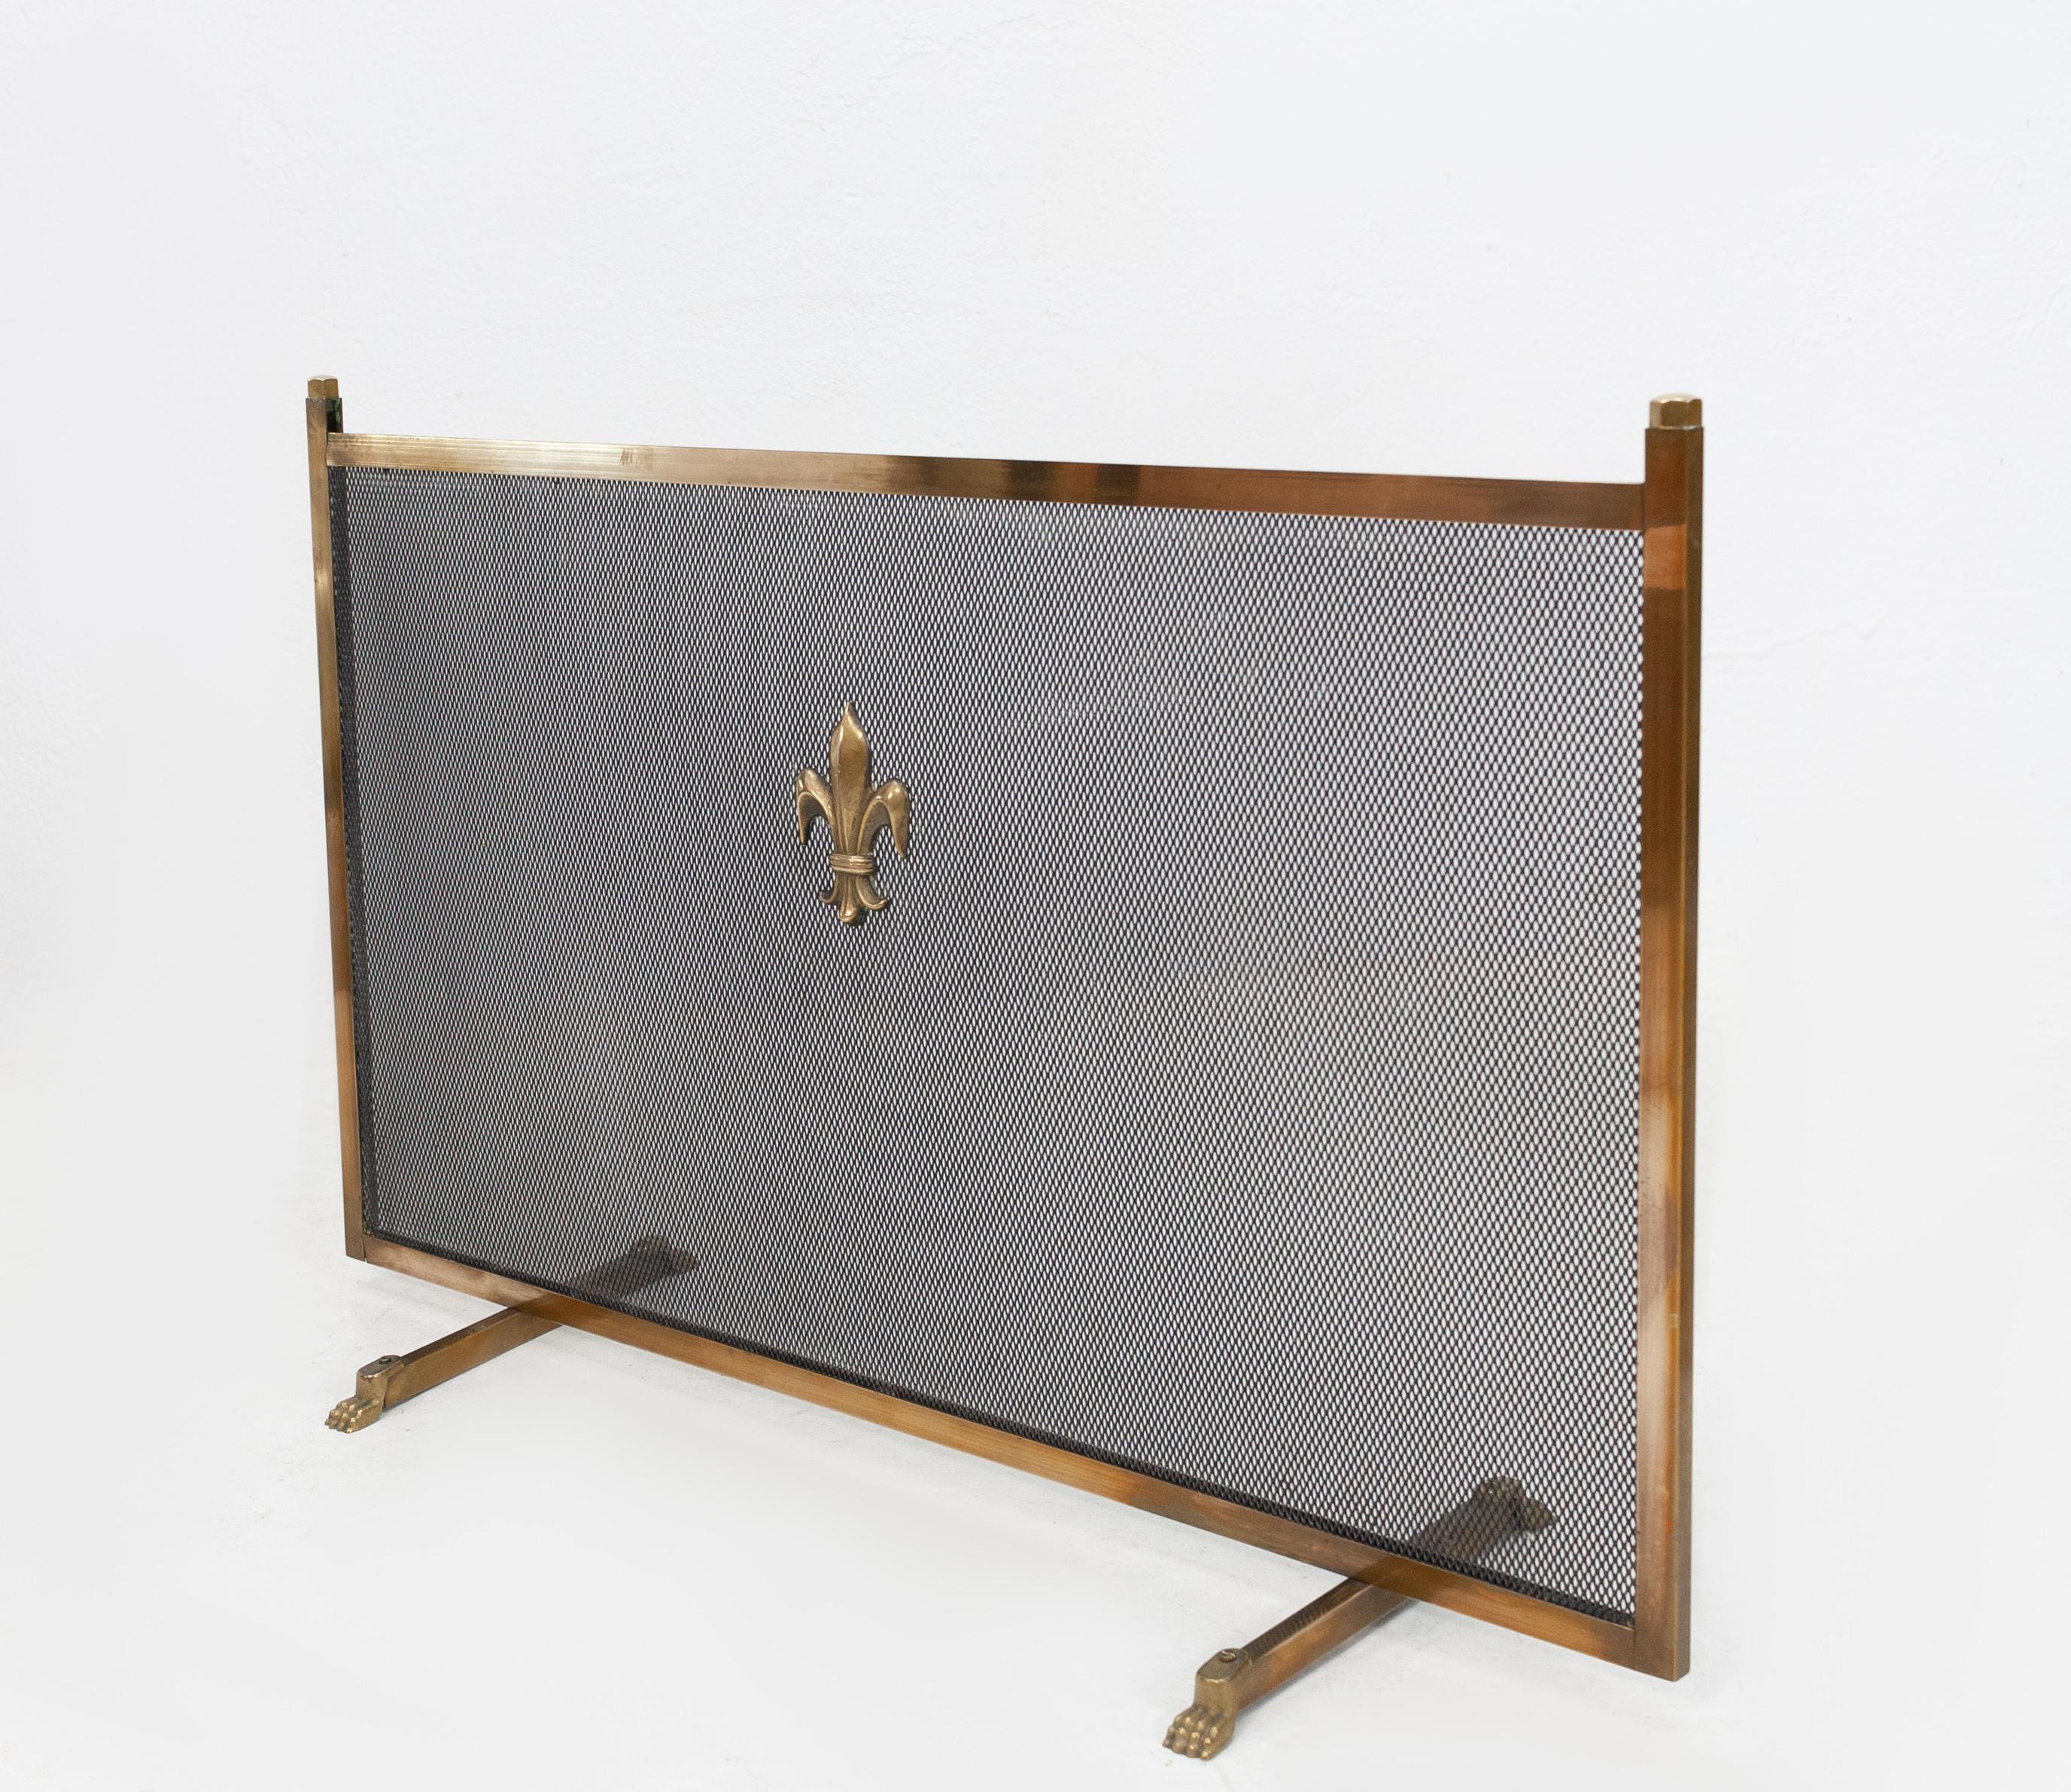 Brass fireplace tools comes with a brass screen. Very nice attractive set, 1940-1950
good condition.
Measures: Fireplace set height 74 cm, width 25 cm, depth 20 cm.